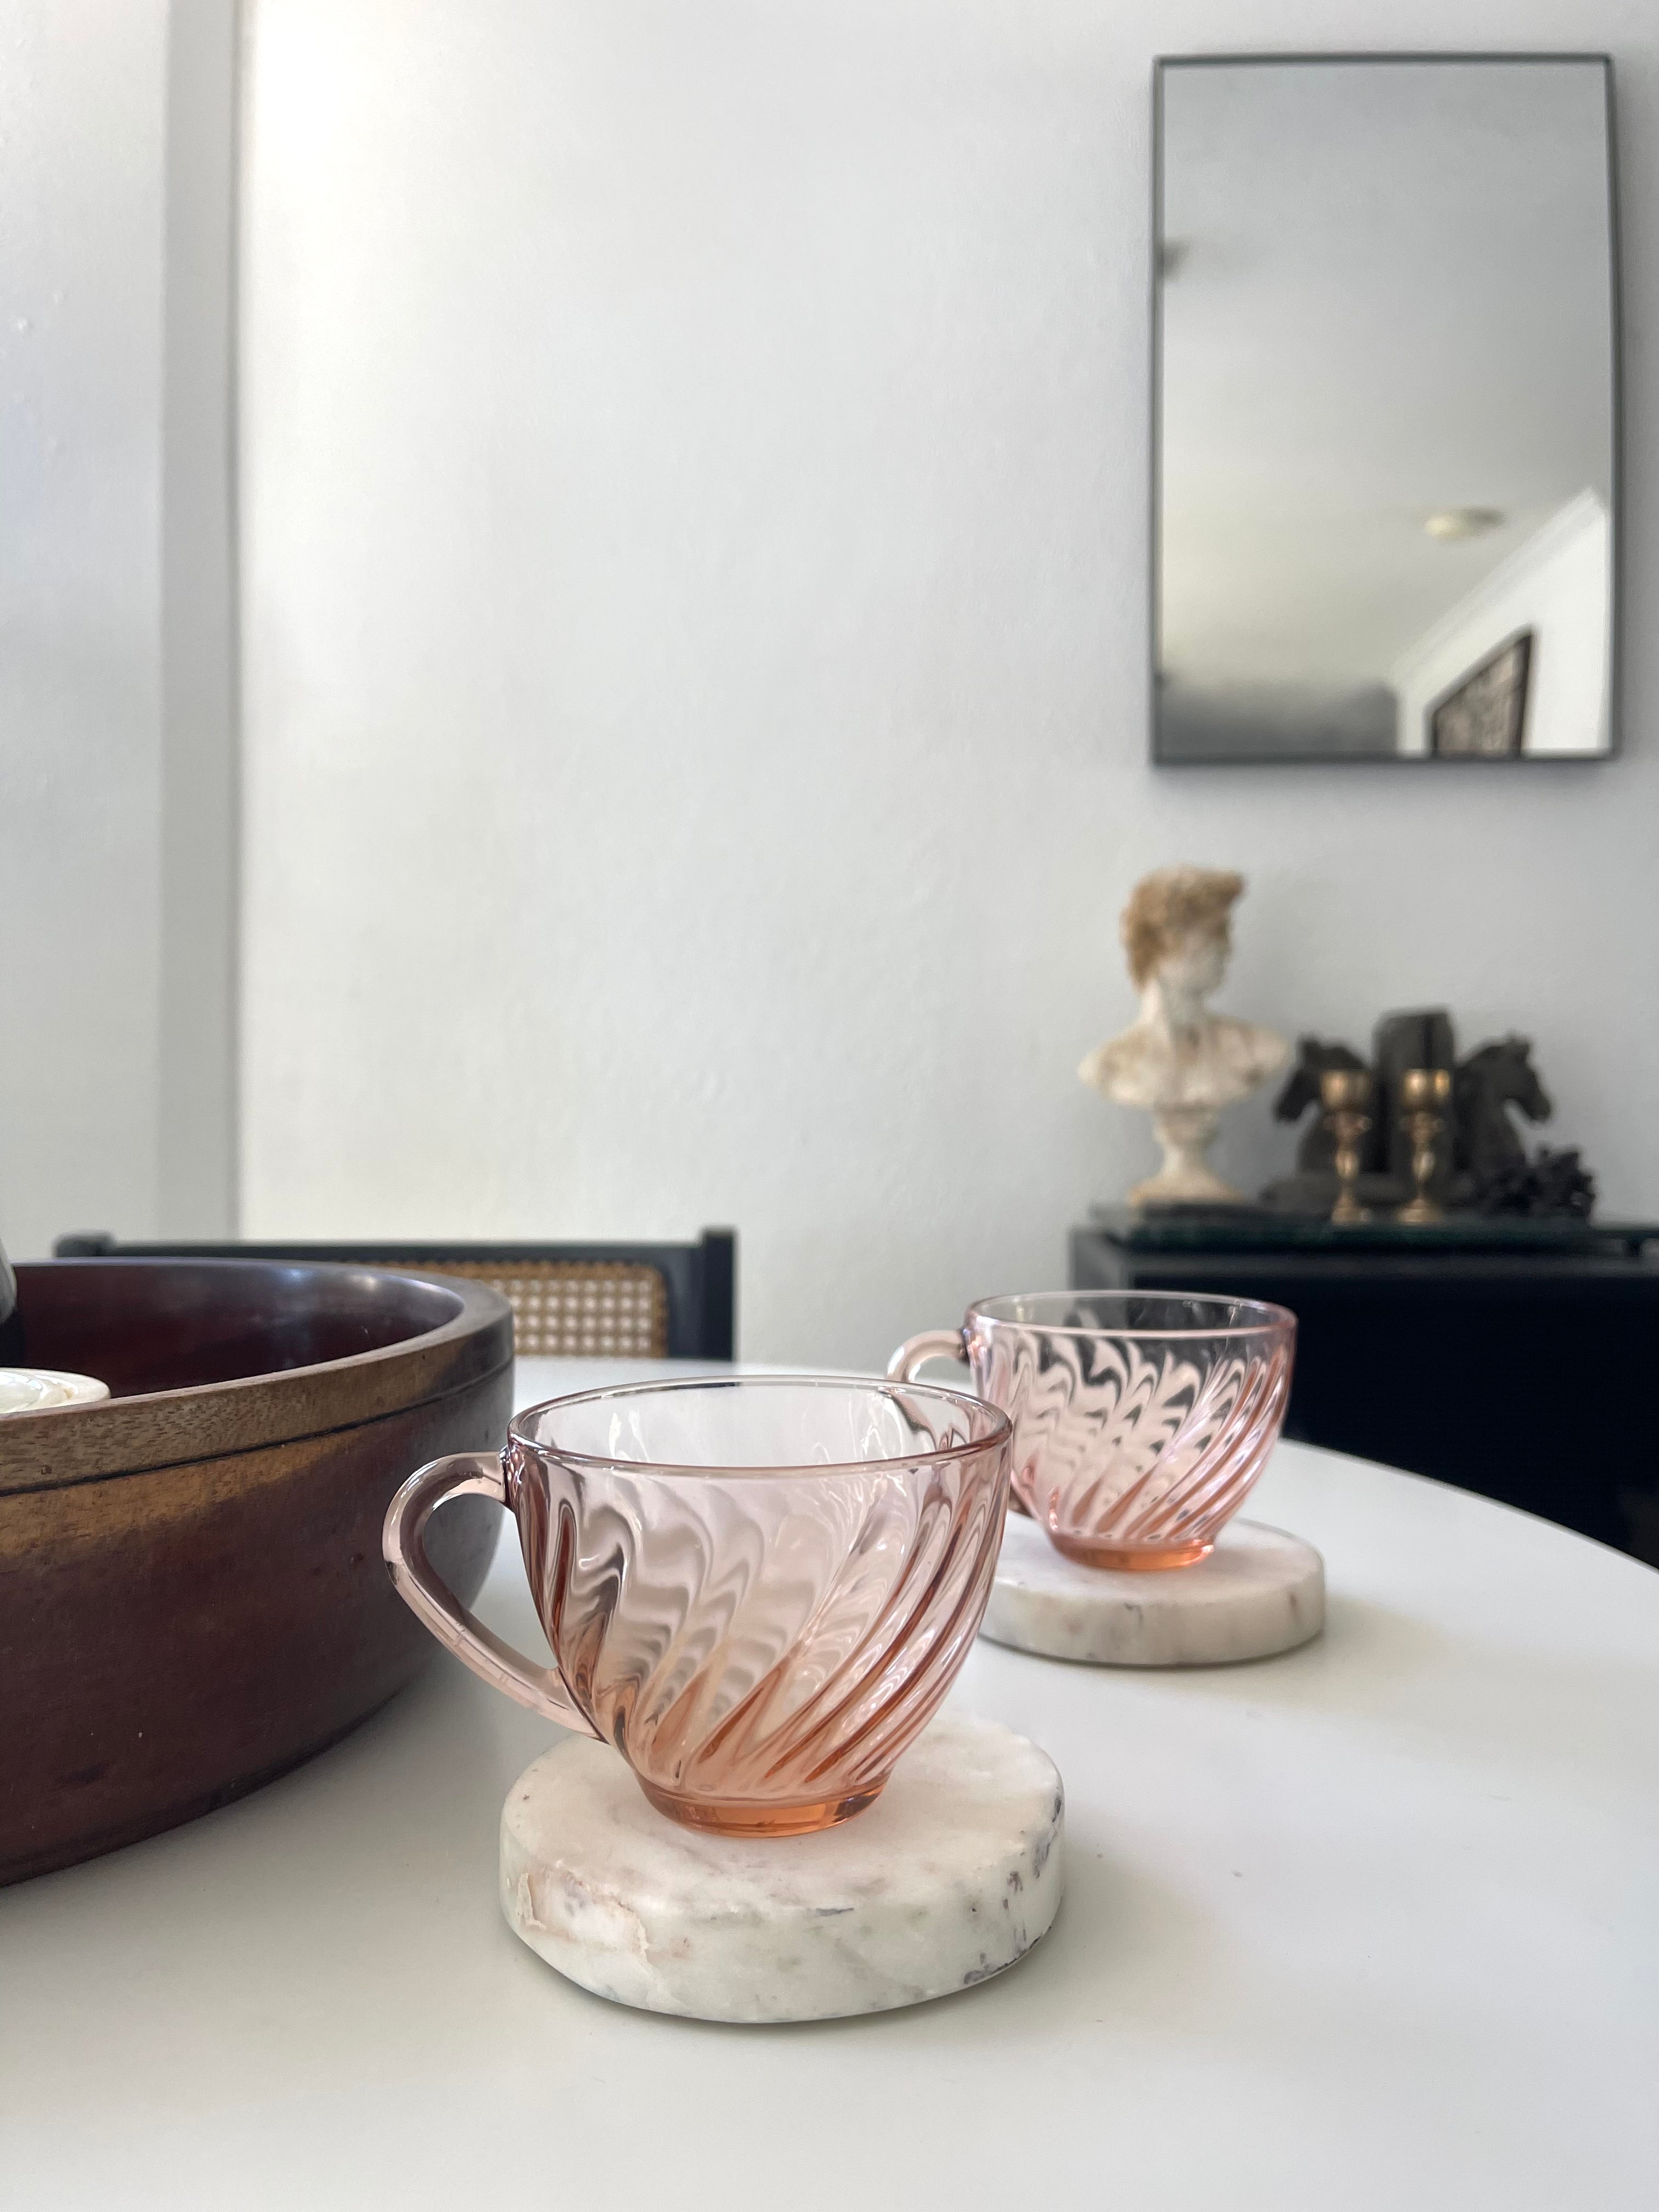 Arcoroc pink glass tea cups and saucers